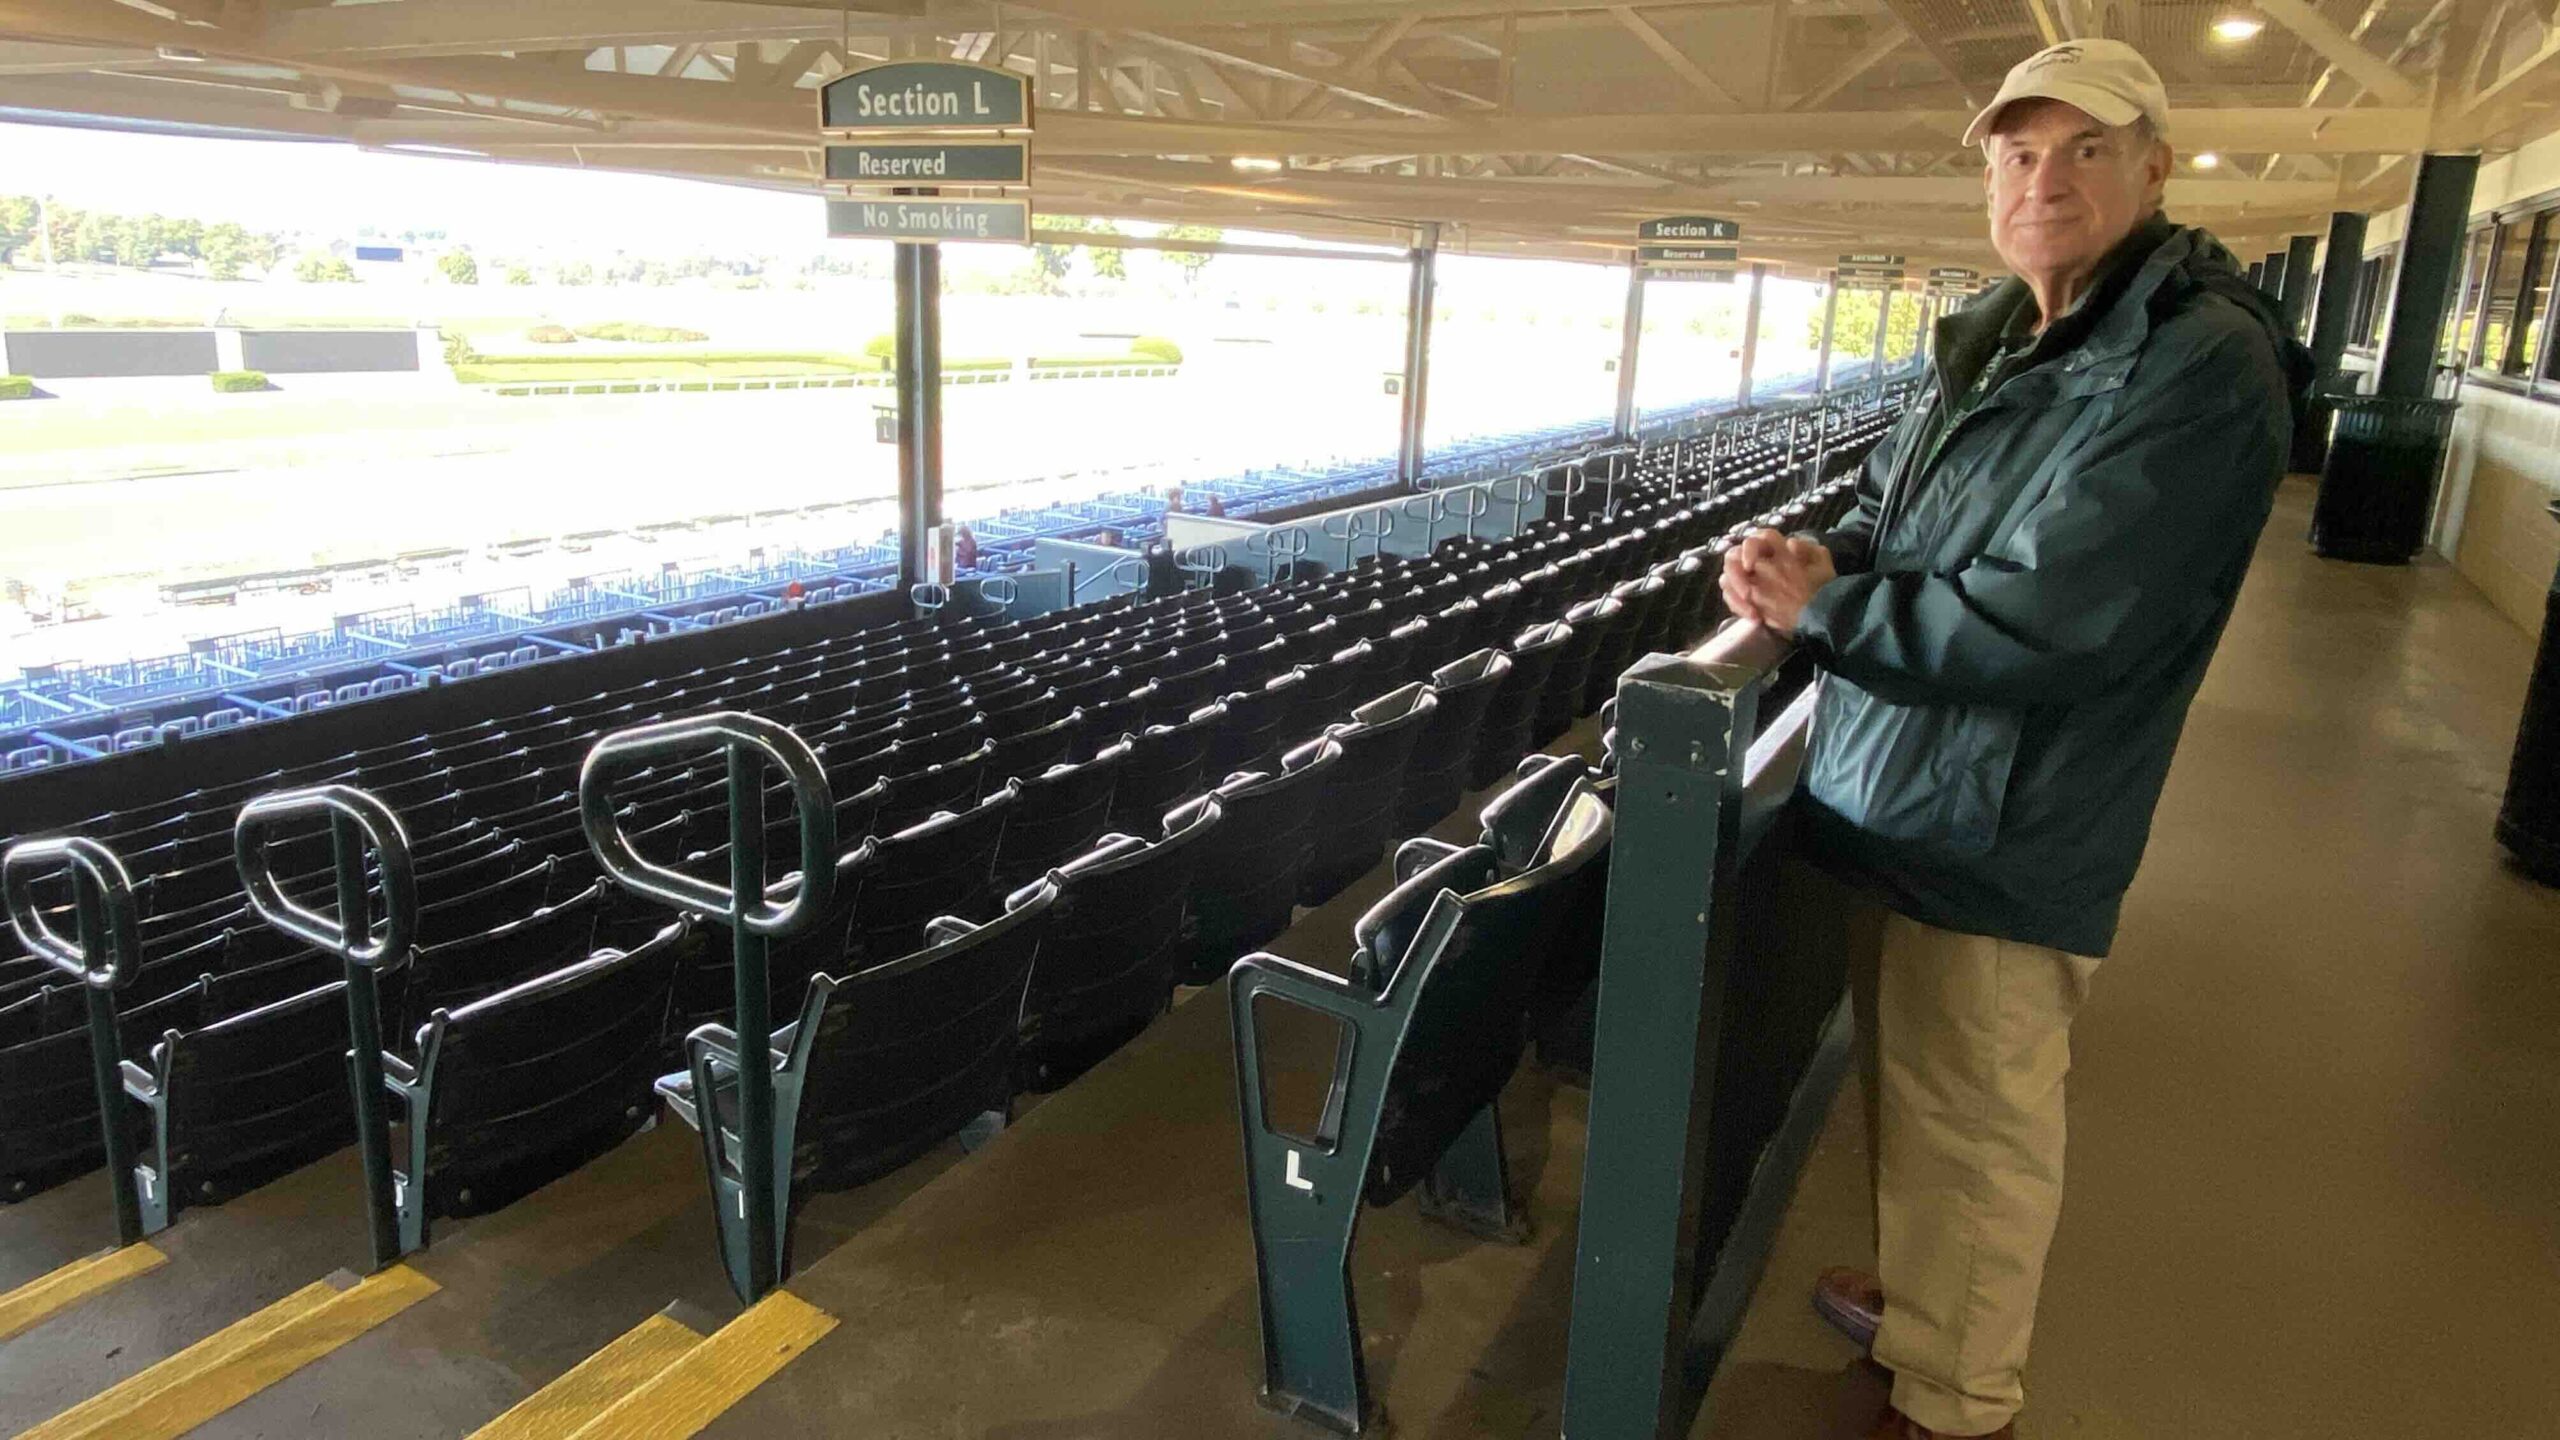 Keeneland Tour guide Mike Galanis in the reactrack grandstand